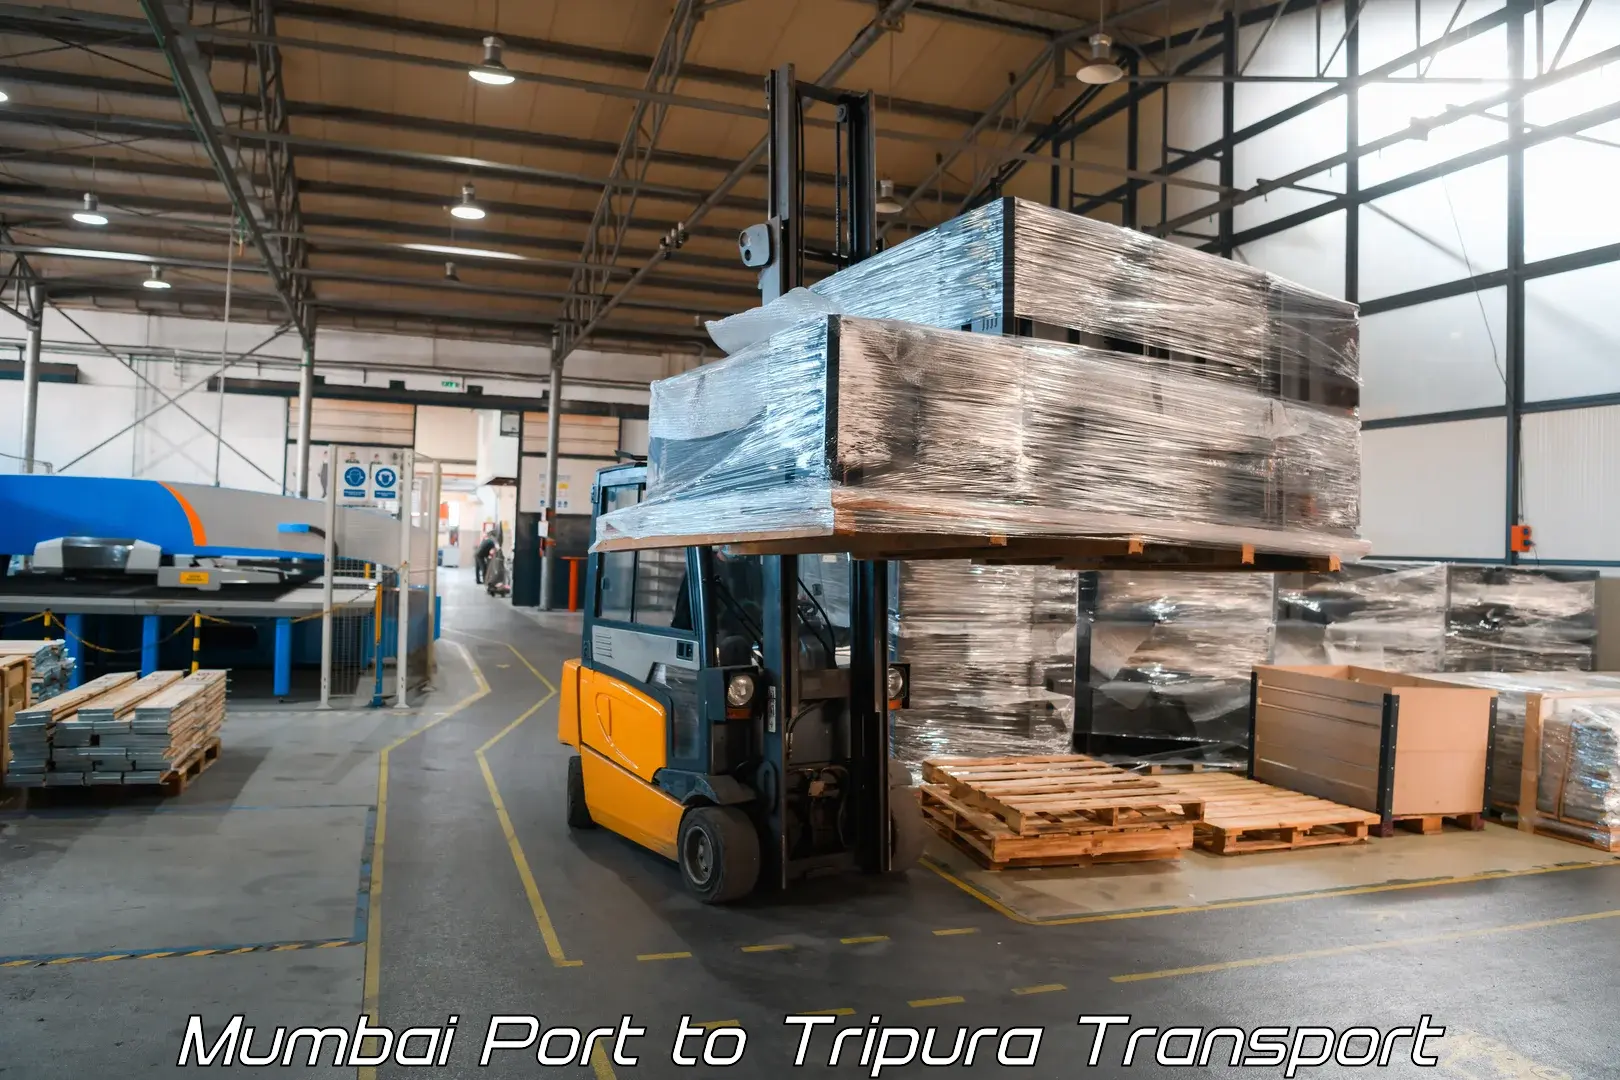 Part load transport service in India in Mumbai Port to Manughat